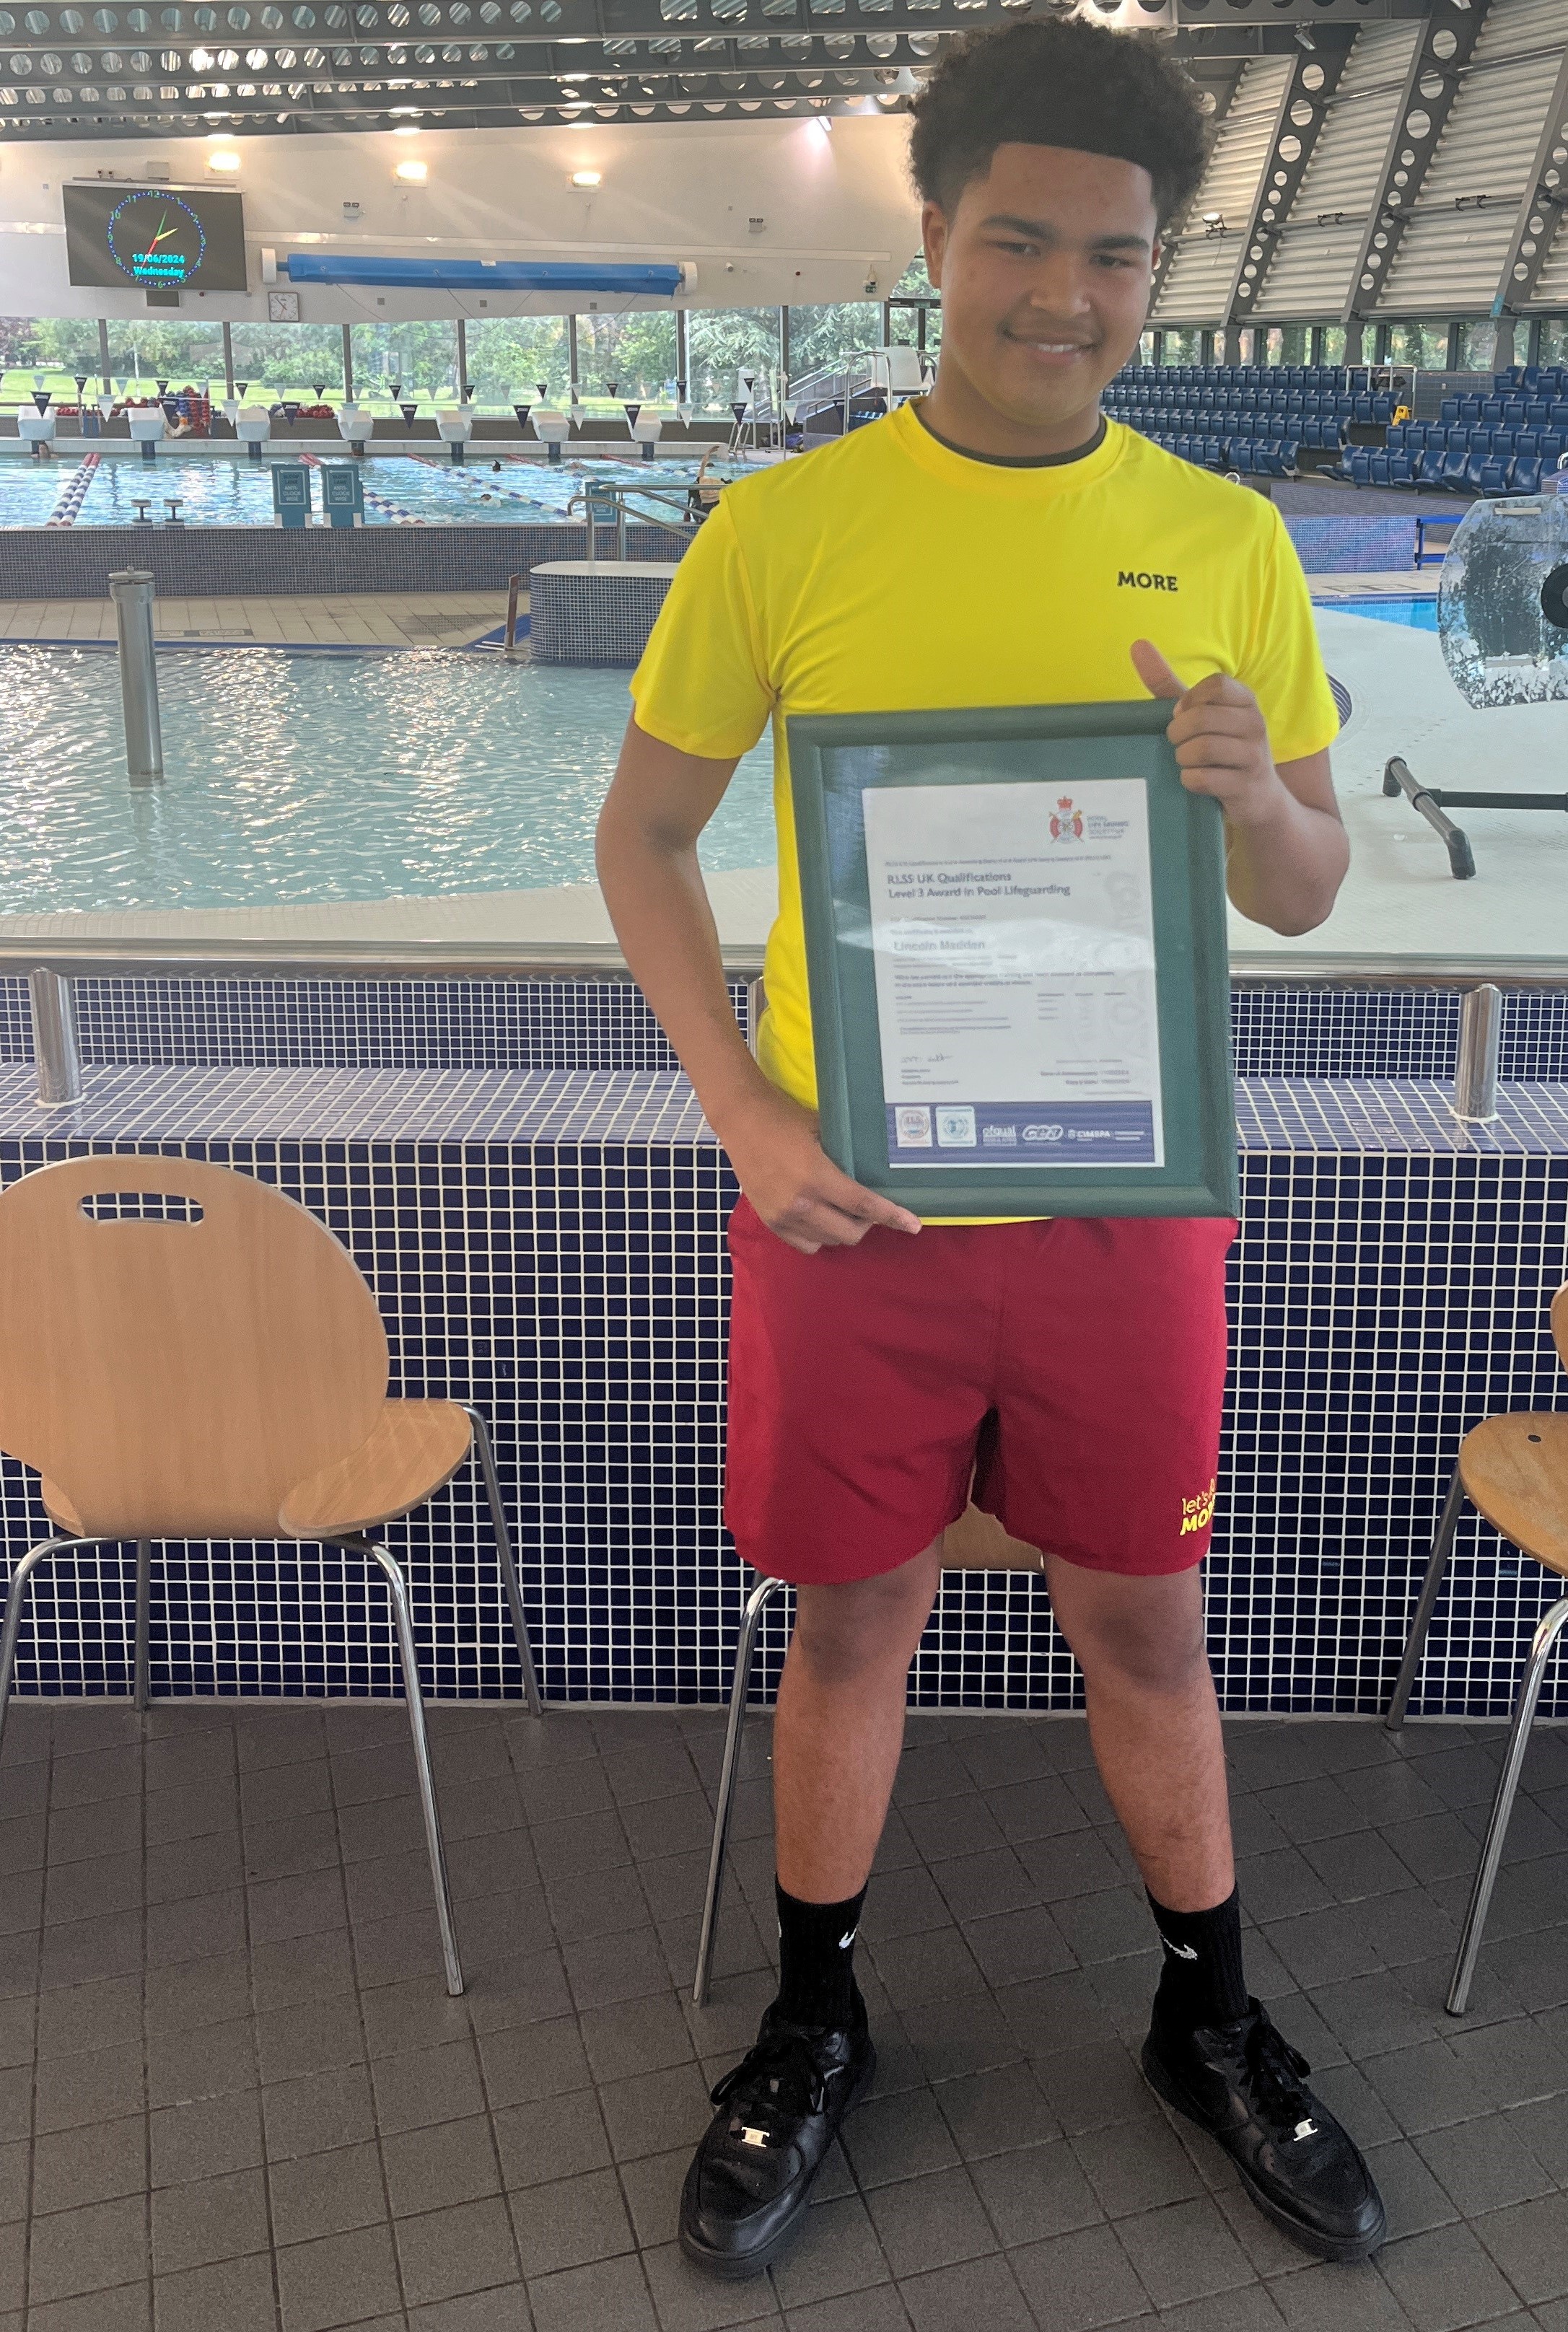 lifeguard holding certificate at Leys pool.